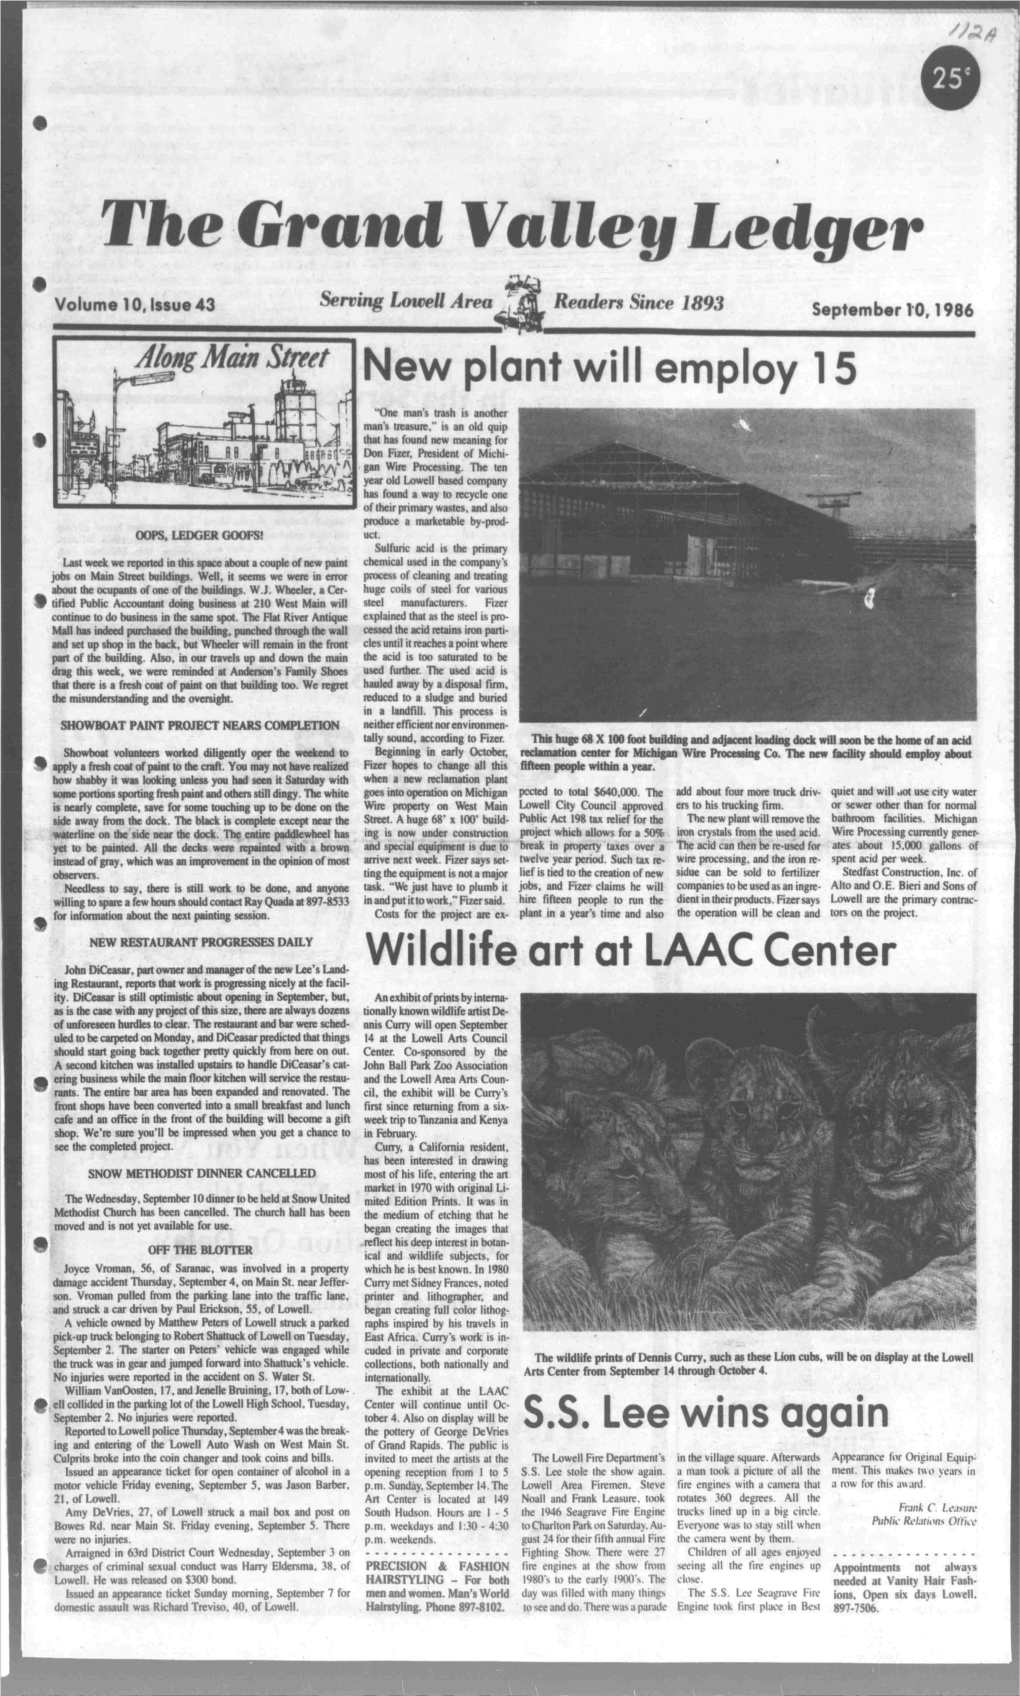 New Plant Will Employ 15 Wildlife Art at LAAC Center S.S. Lee Wins Again